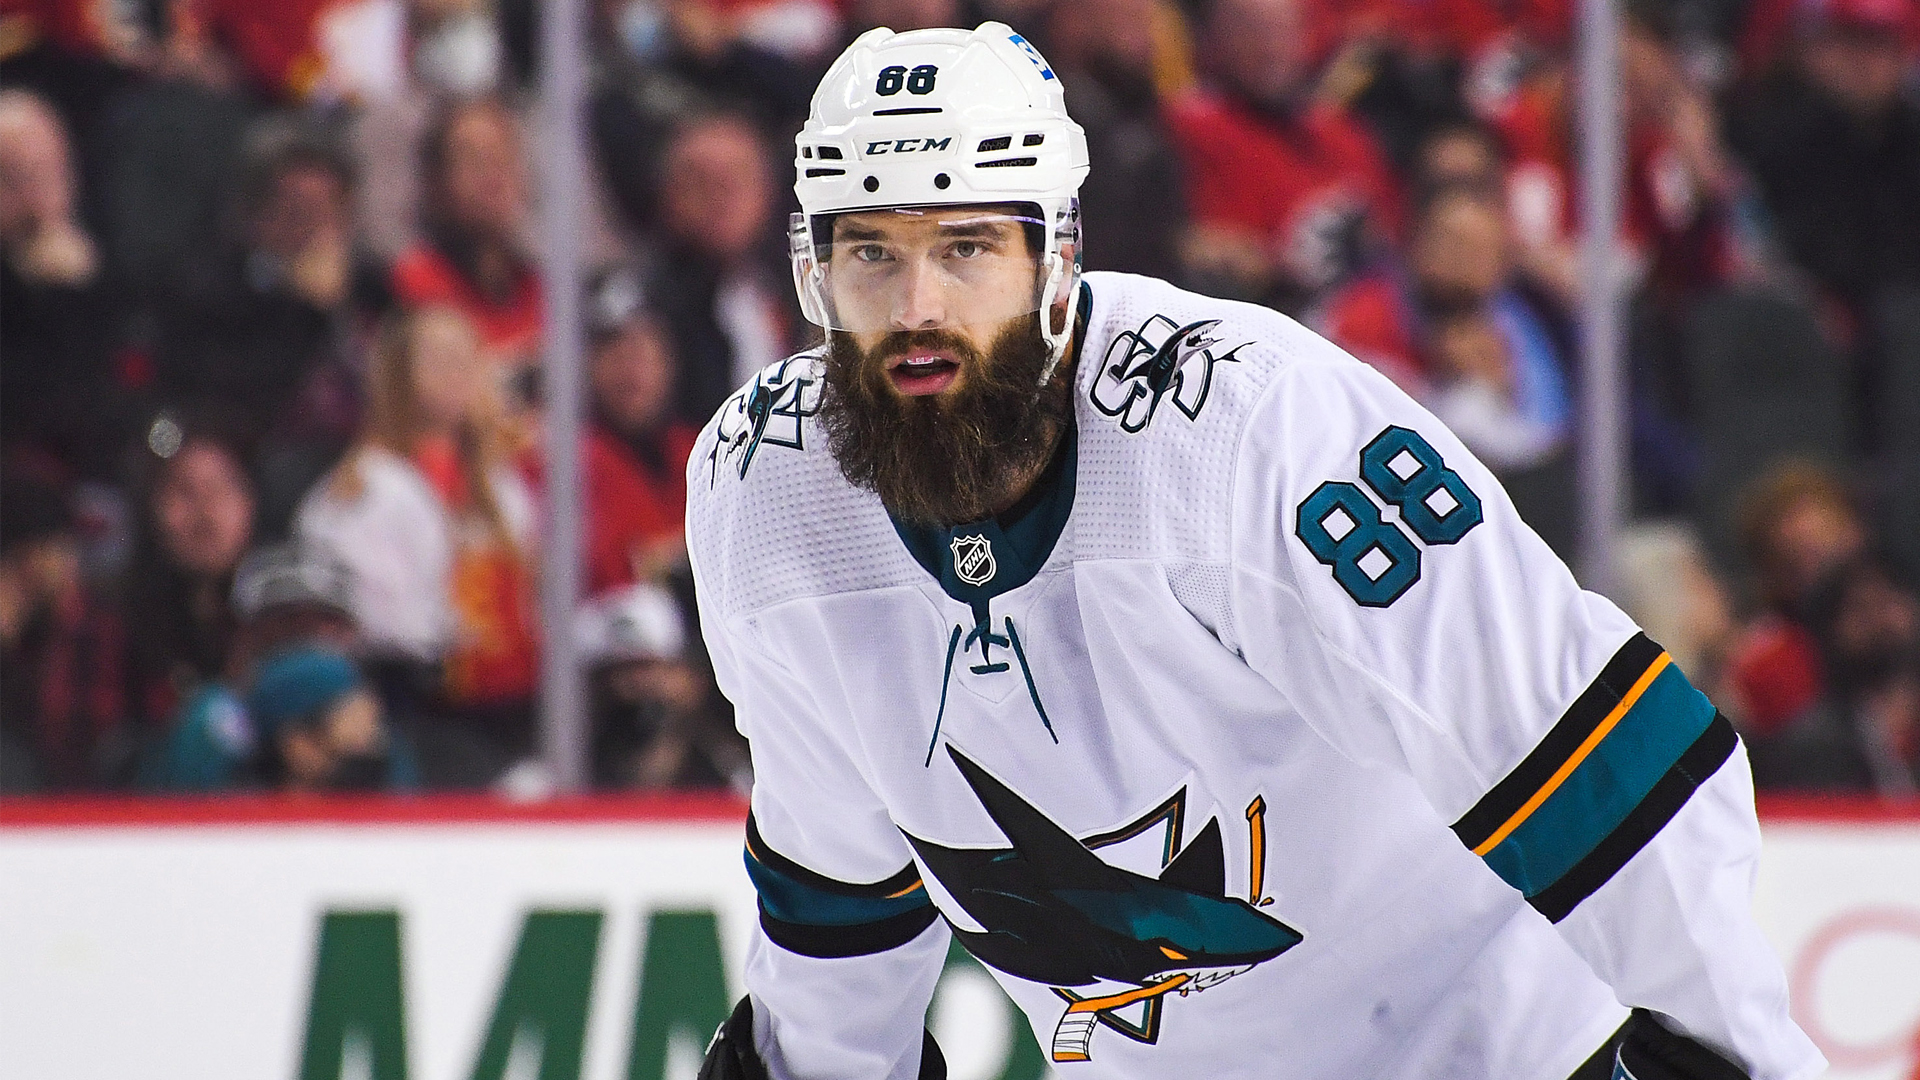 Brent Burns assisted on each Hurricanes goal in his first playoff